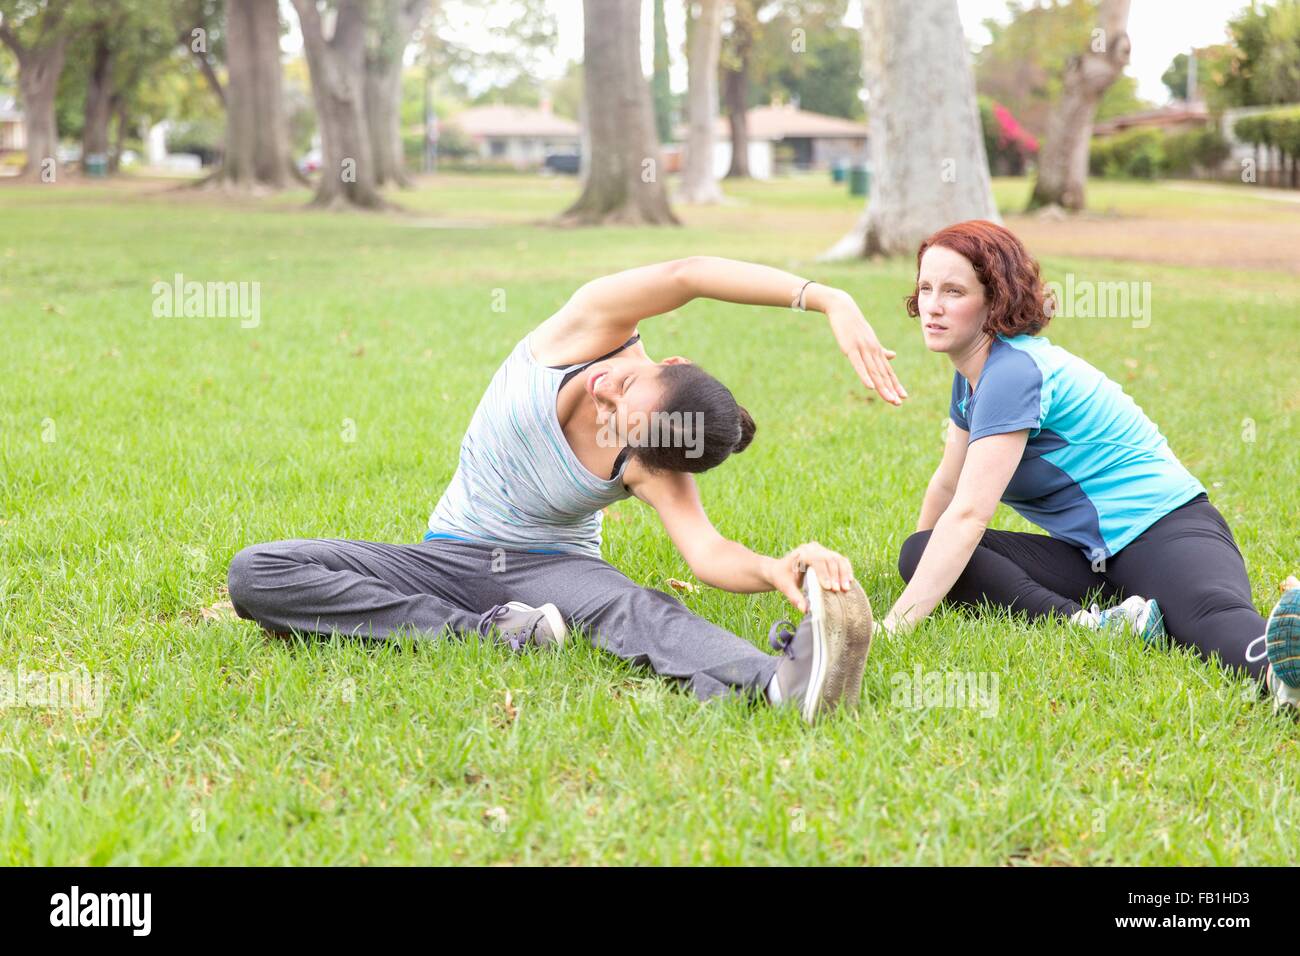 Young women wearing sports clothing sitting on grass stretching Stock Photo